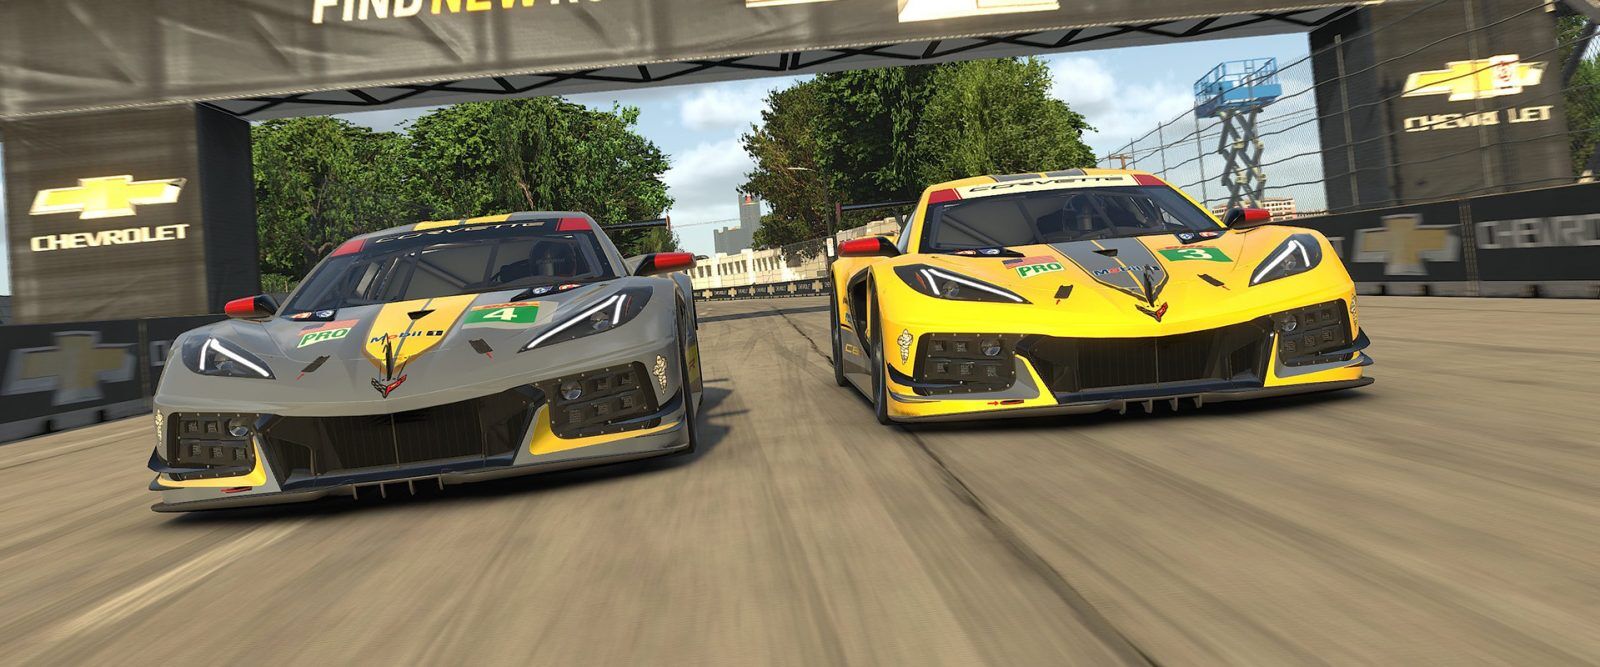 iRacing adds Corvette C8.R to GTE car roster